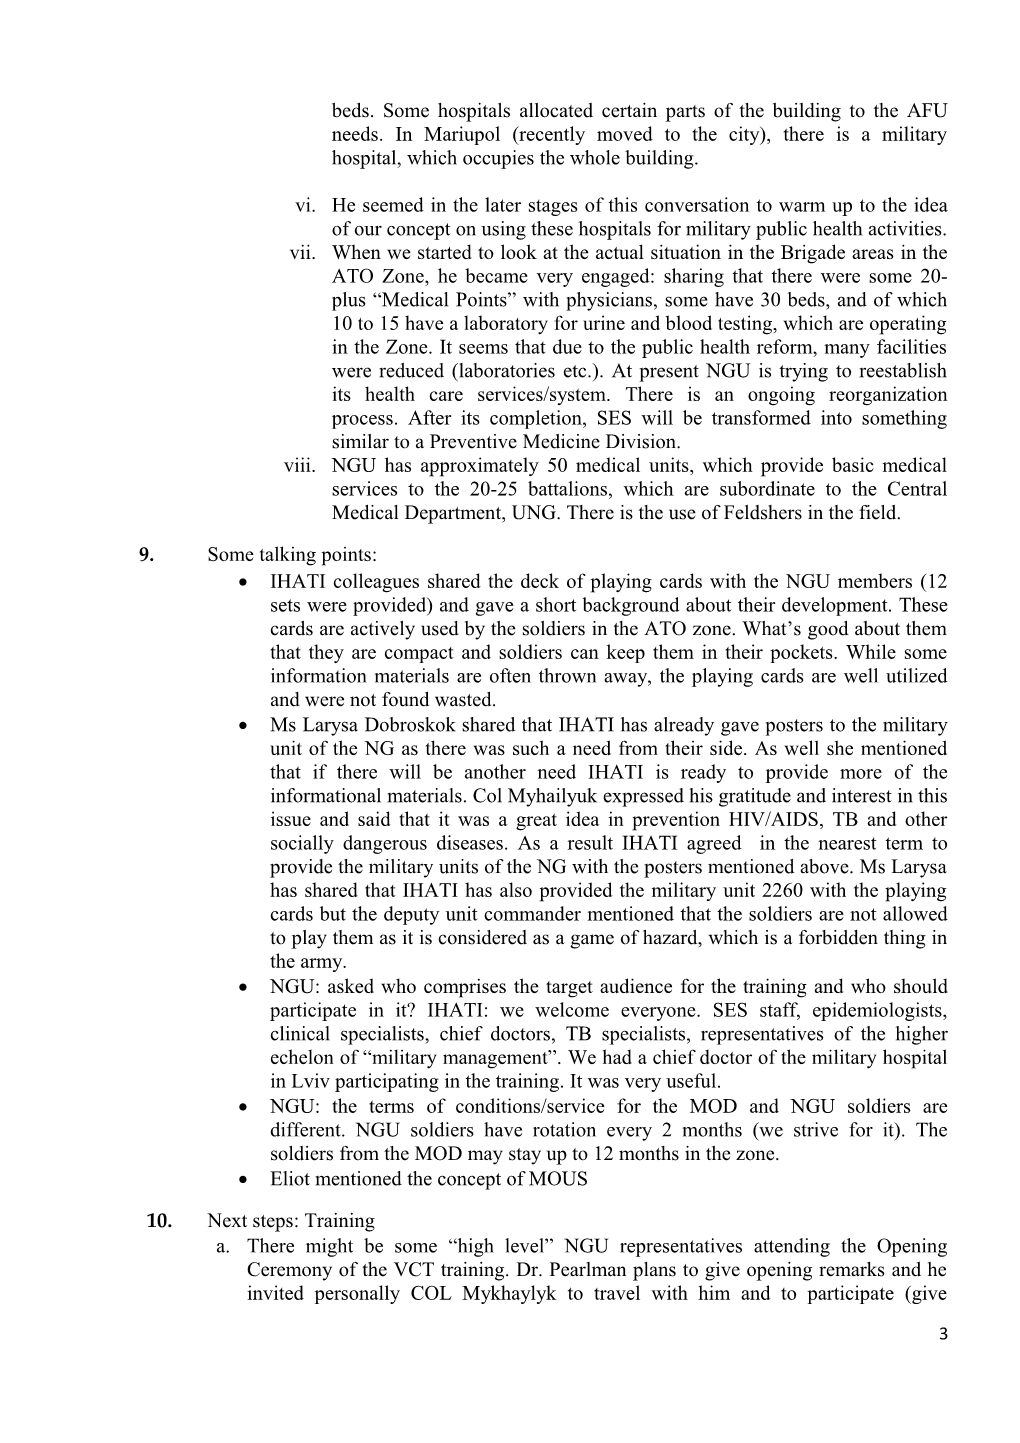 Subject: Draft Minutes of the Meeting with the National Guard of Ukraine (NGU)